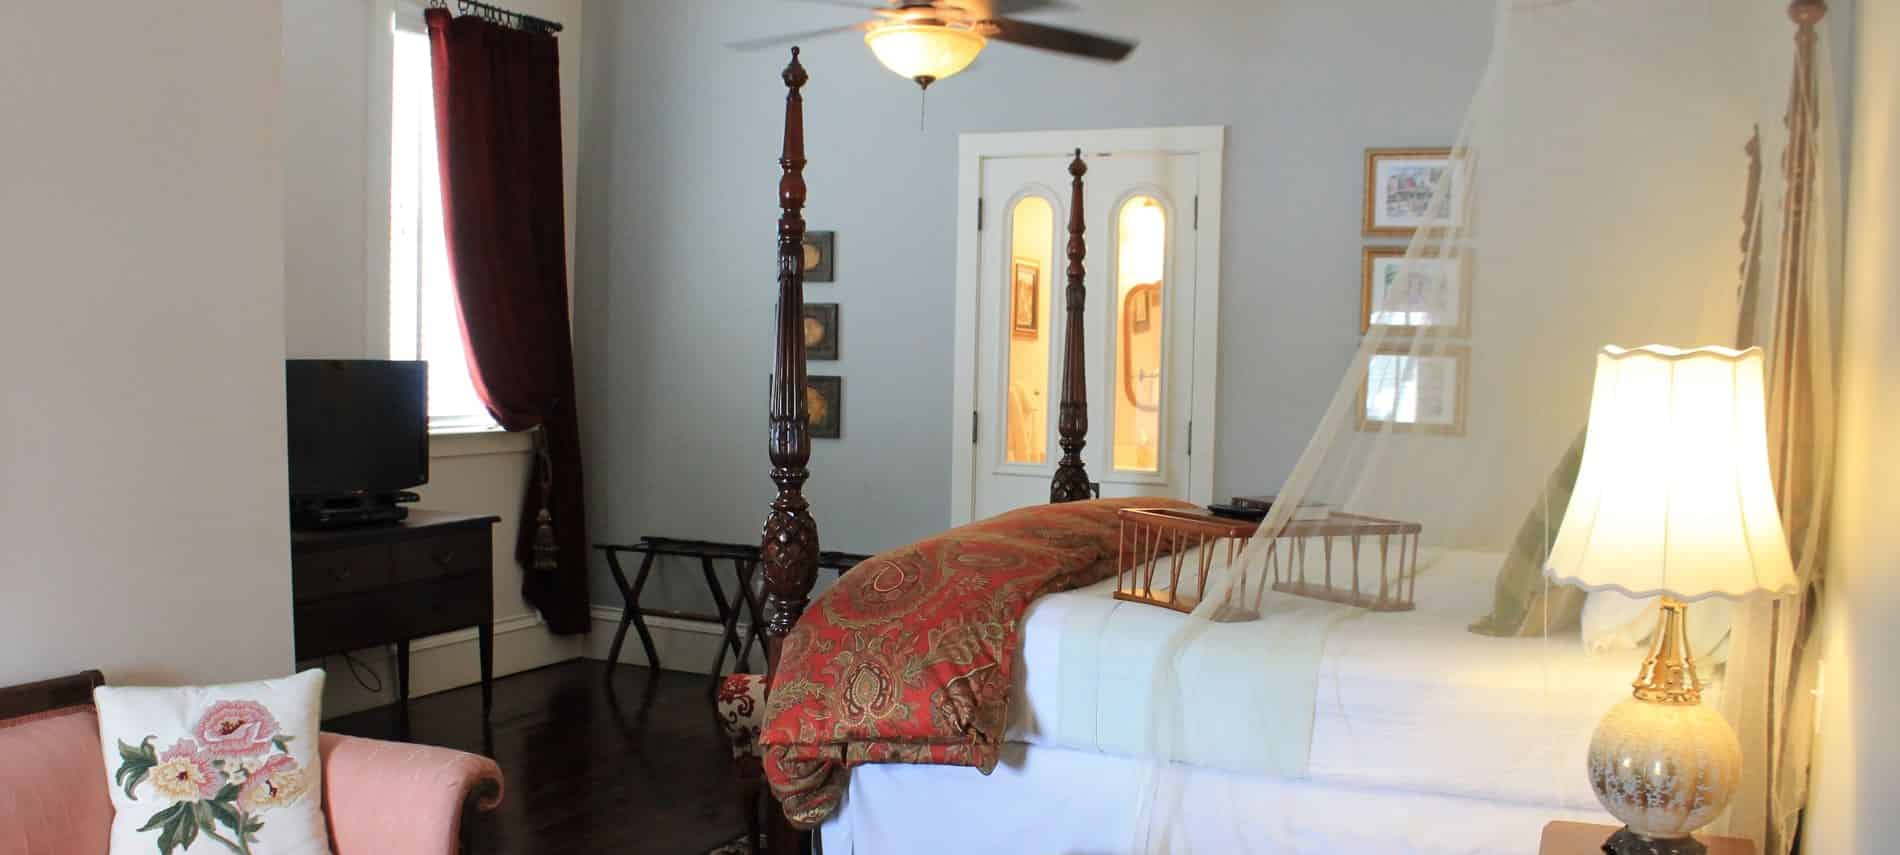 Savannah guest room with window, dark wood four poster bed, sheer white canopy panels and guest bath